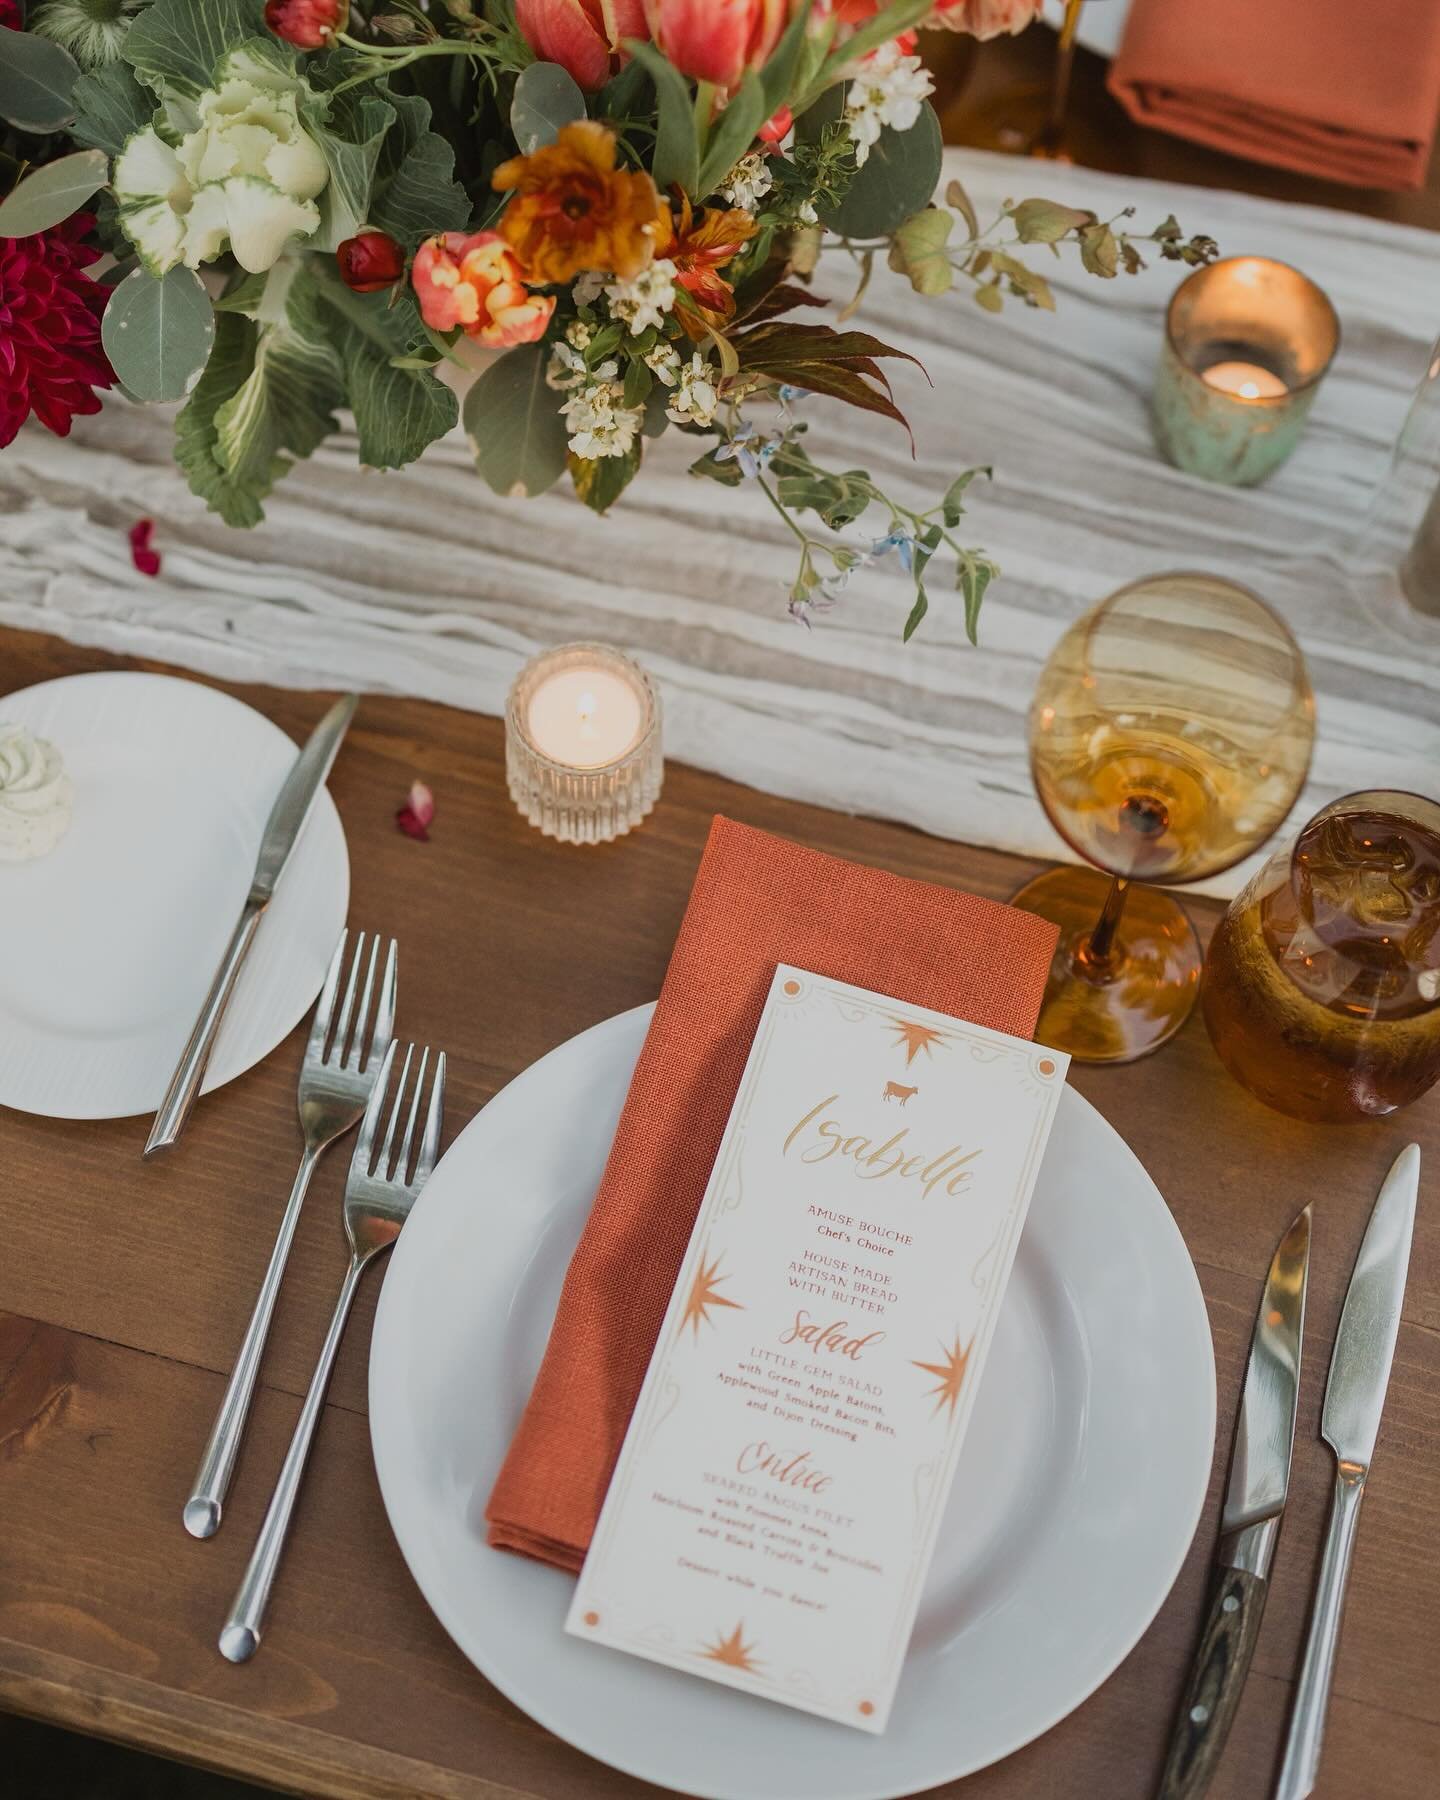 Another favorite moment from N+S&rsquo;s big day &mdash; customized menus with calligraphy for their guests! ✨ 

Photo: @janeinthewoods | Planner: @jennigrubbaevents | Venue: @laubergedesedona | Floral: @formfloral